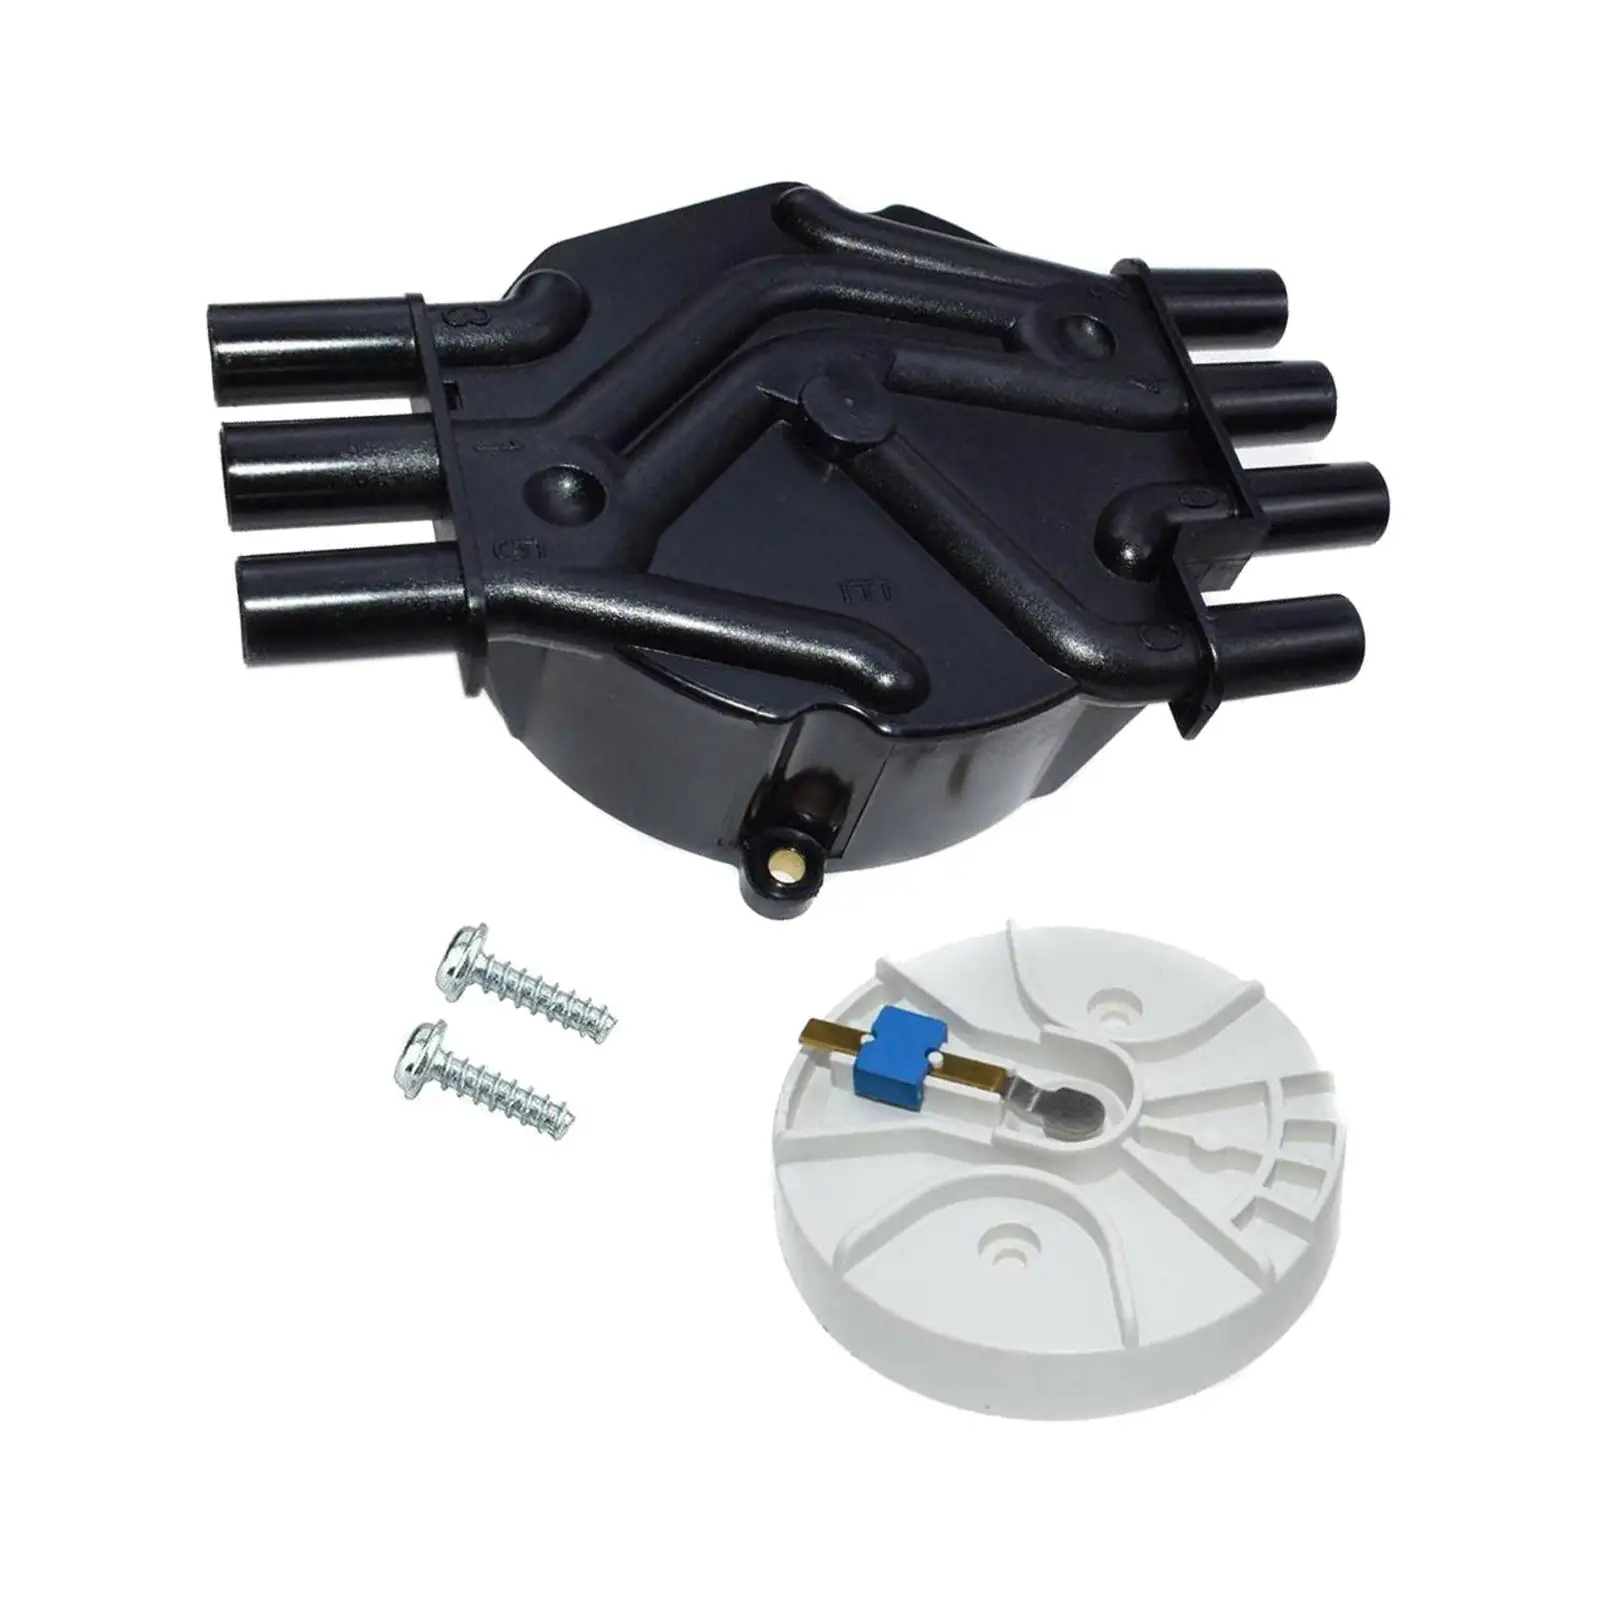 Distributor Cover Professional High Rotor Ignition set with Screw for DR475 D328A auto modification 888731 D321A